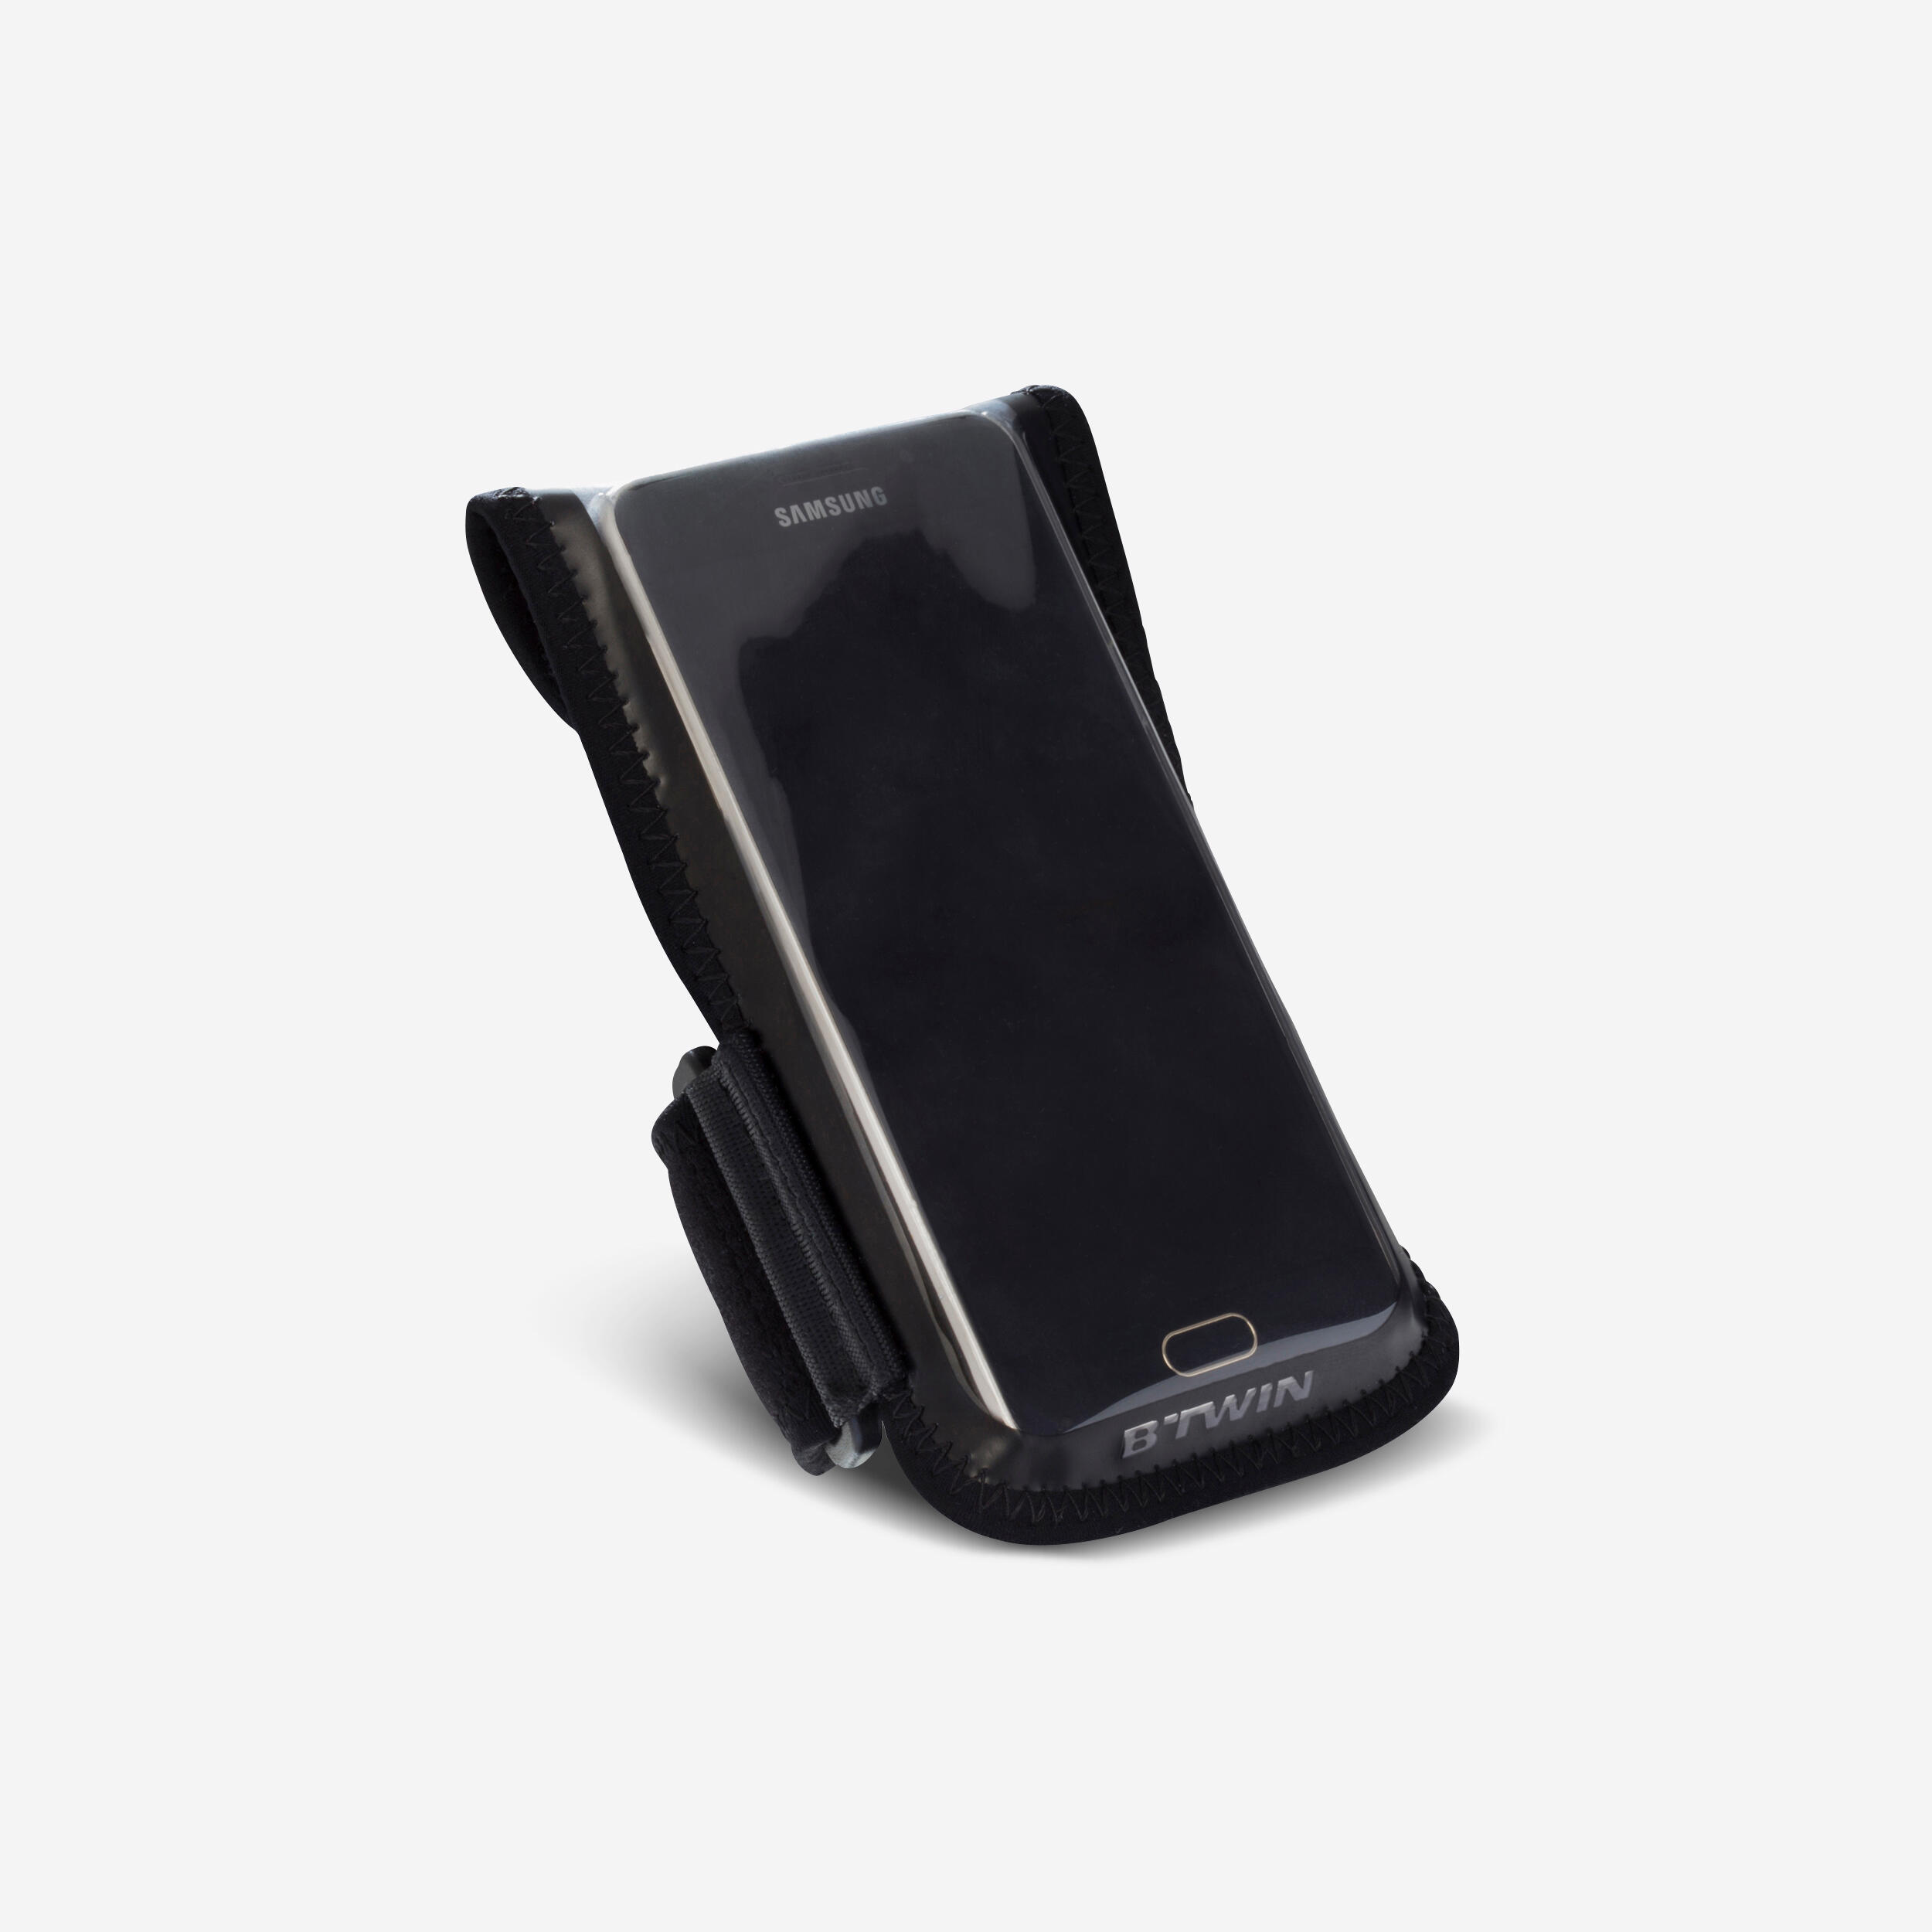 BTWIN 500 Cycling Smartphone Holder - Black